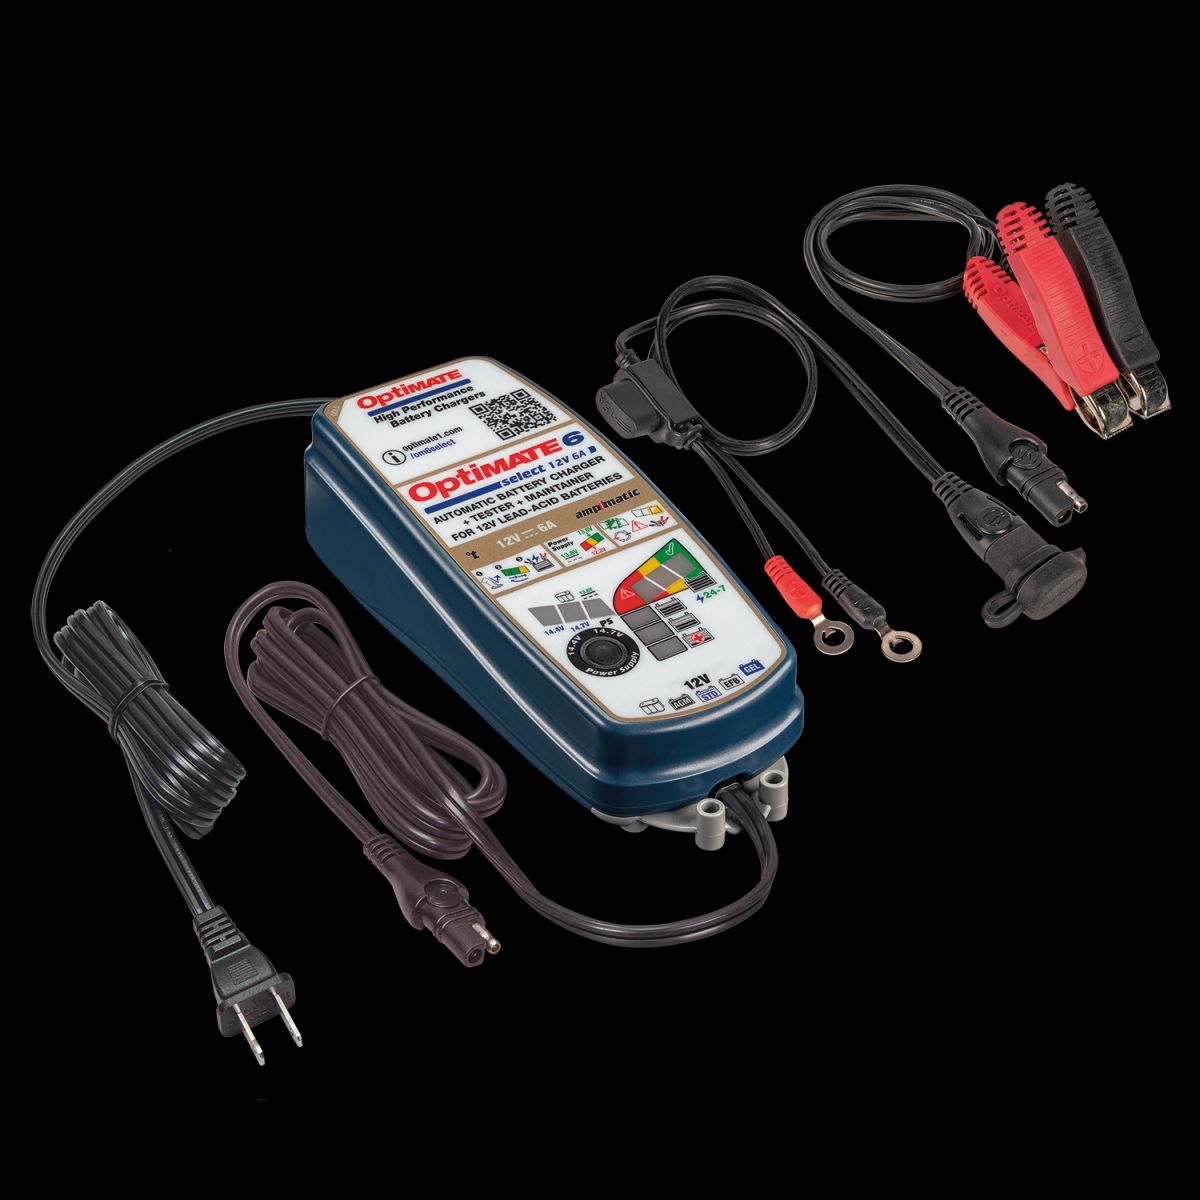 TecMate Optimate 6 Ampmatic Battery Charger, Parts & Accessories